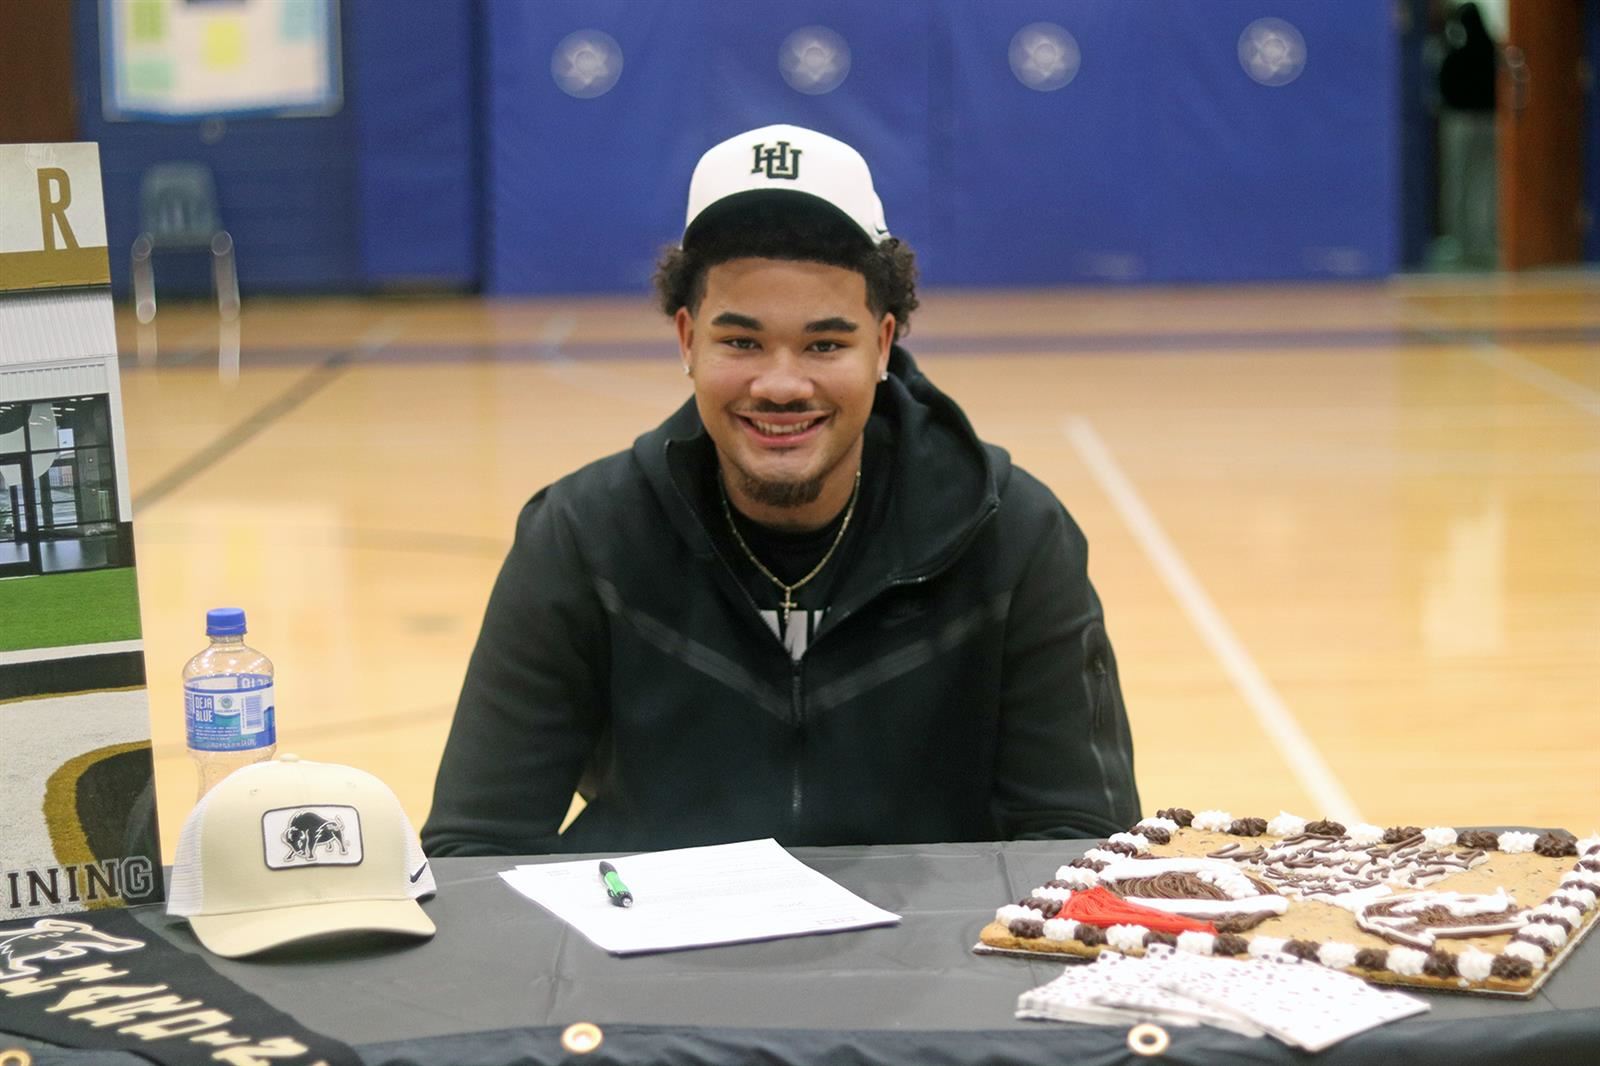 Cypress Creek High School senior Johnathan Vining signed a letter of intent to play football at Harding University.